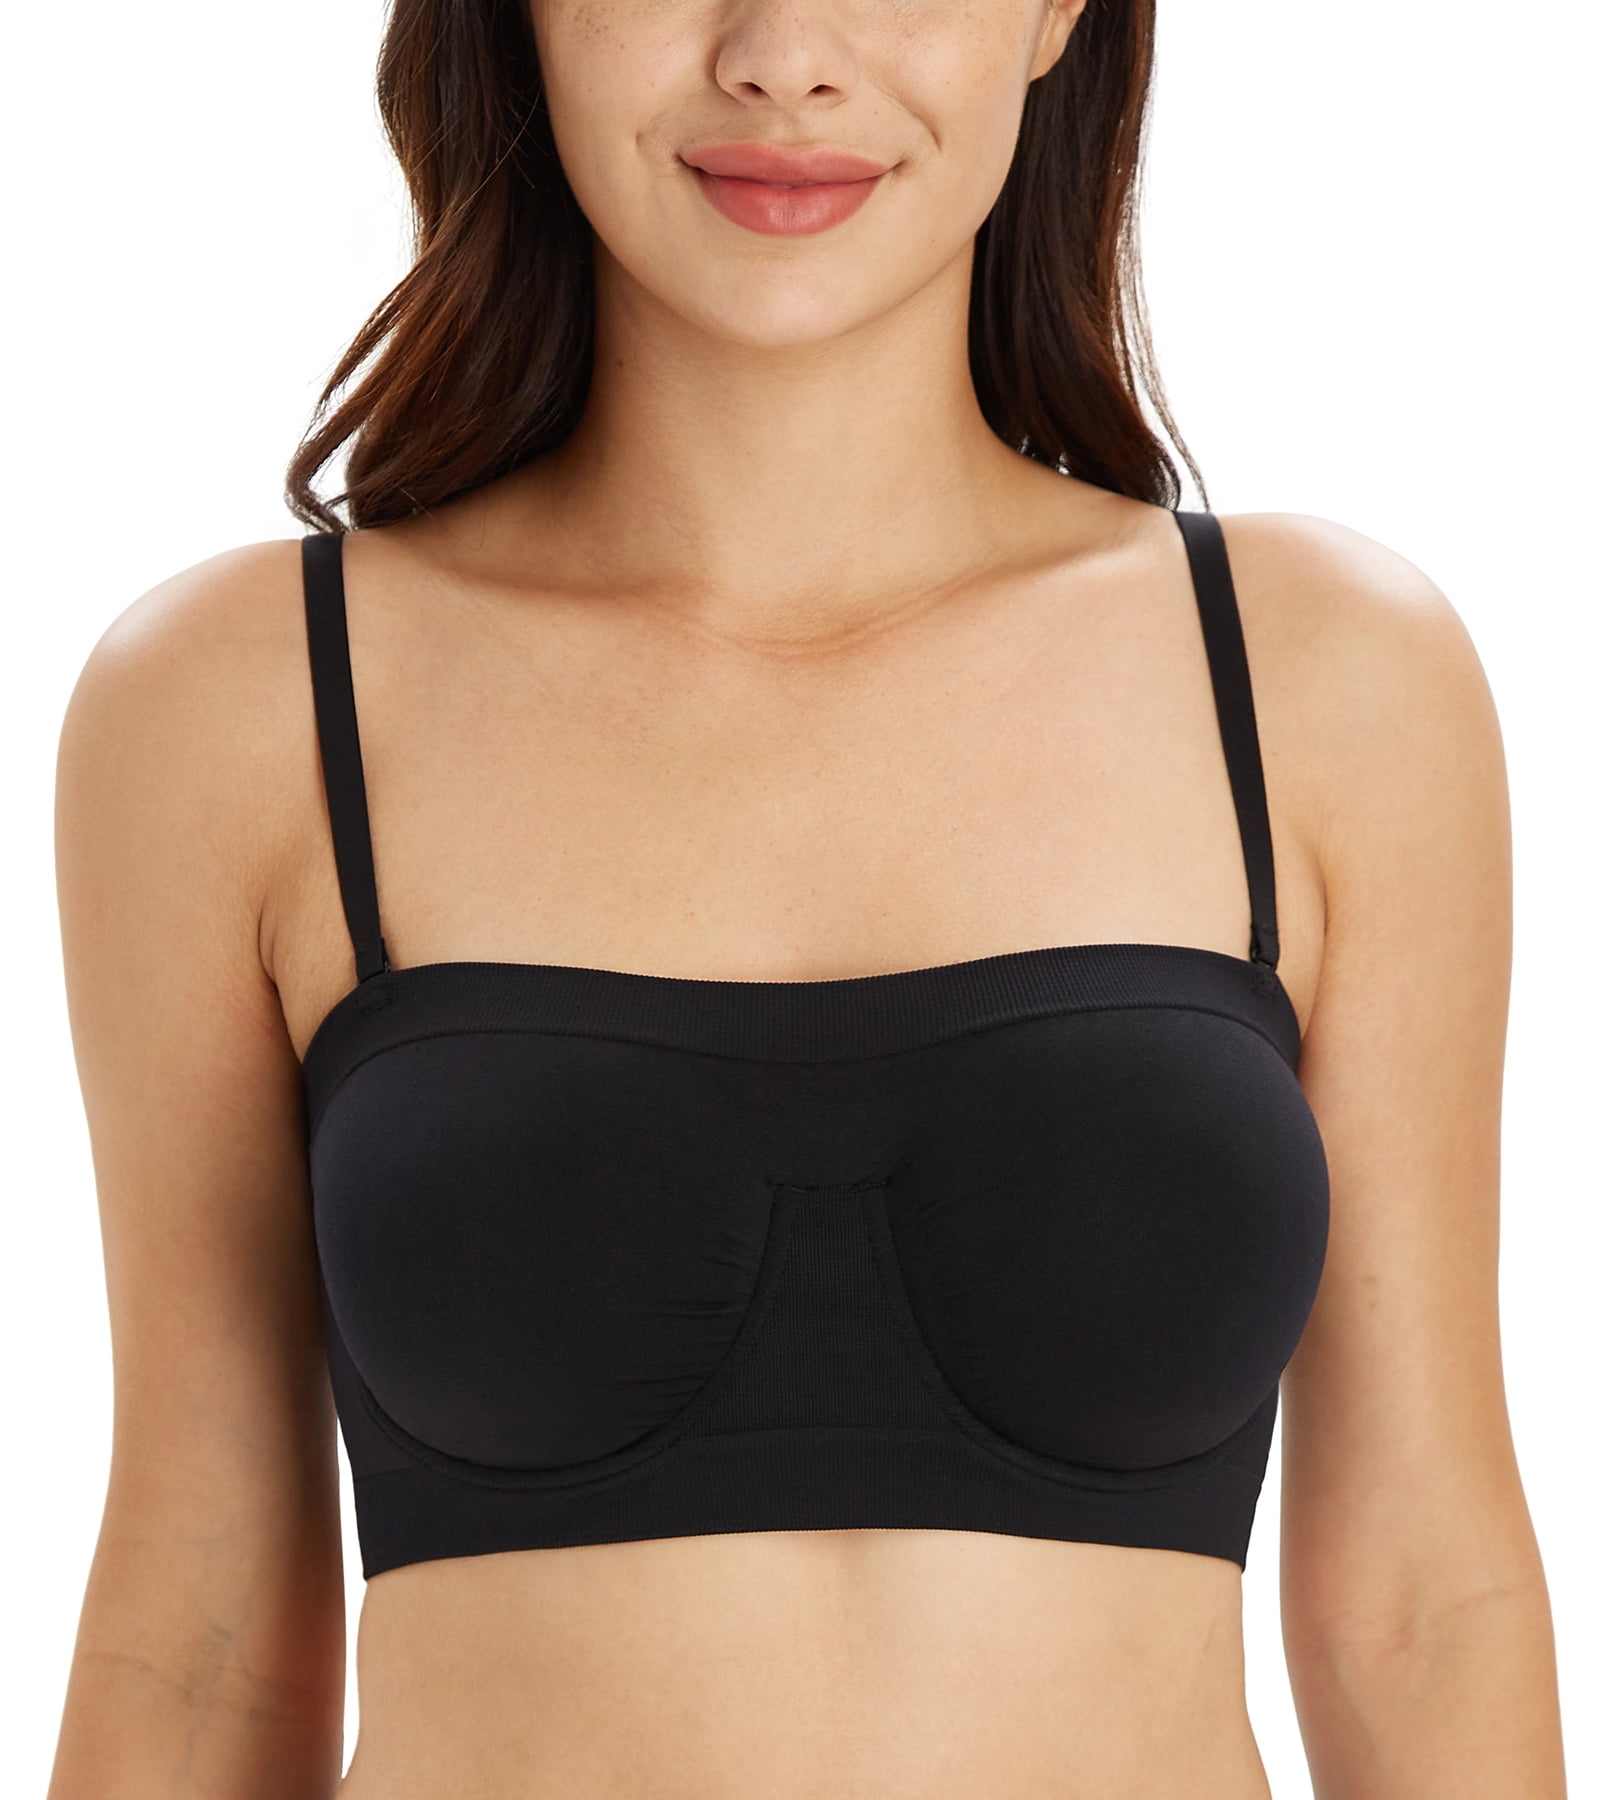 Get ubras Two Ways Wearing With Removable Strap Gathering Tube Top Bra Nude  B75 1 each Delivered